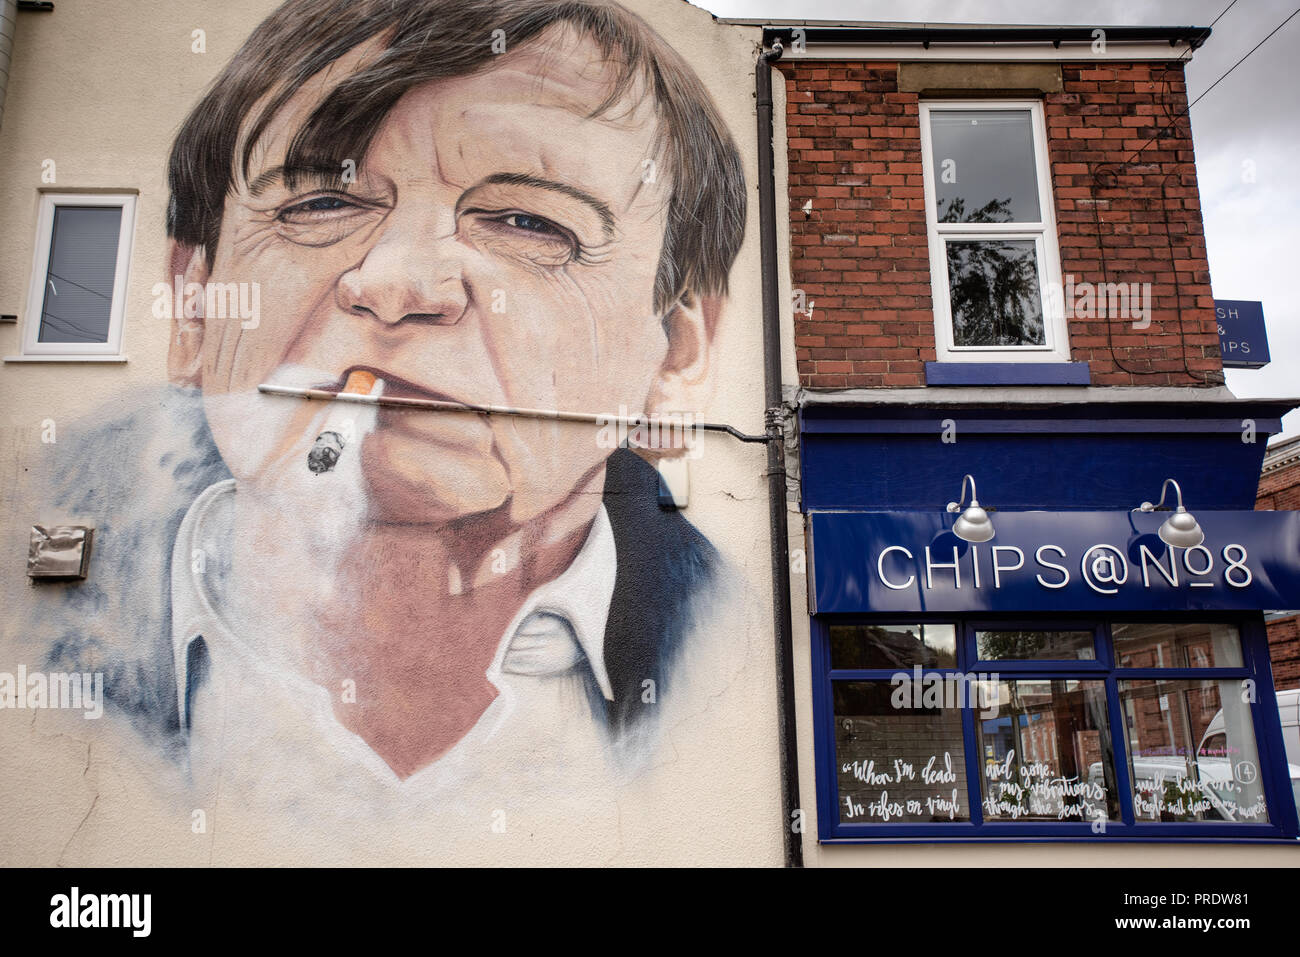 Prestwich, UK. 1st Oct 2018. Graffiti artist Akse p19 completes his portrait of 'The Fall' frontman Mark E.Smith on the side of a Manchester chip shop. 'The Fall' singer, who died in January 2018, is being commemorated in his hometown of Prestwich, Greater Manchester for an Arts Festival. Credit: Howard Harrison/Alamy Live News Stock Photo